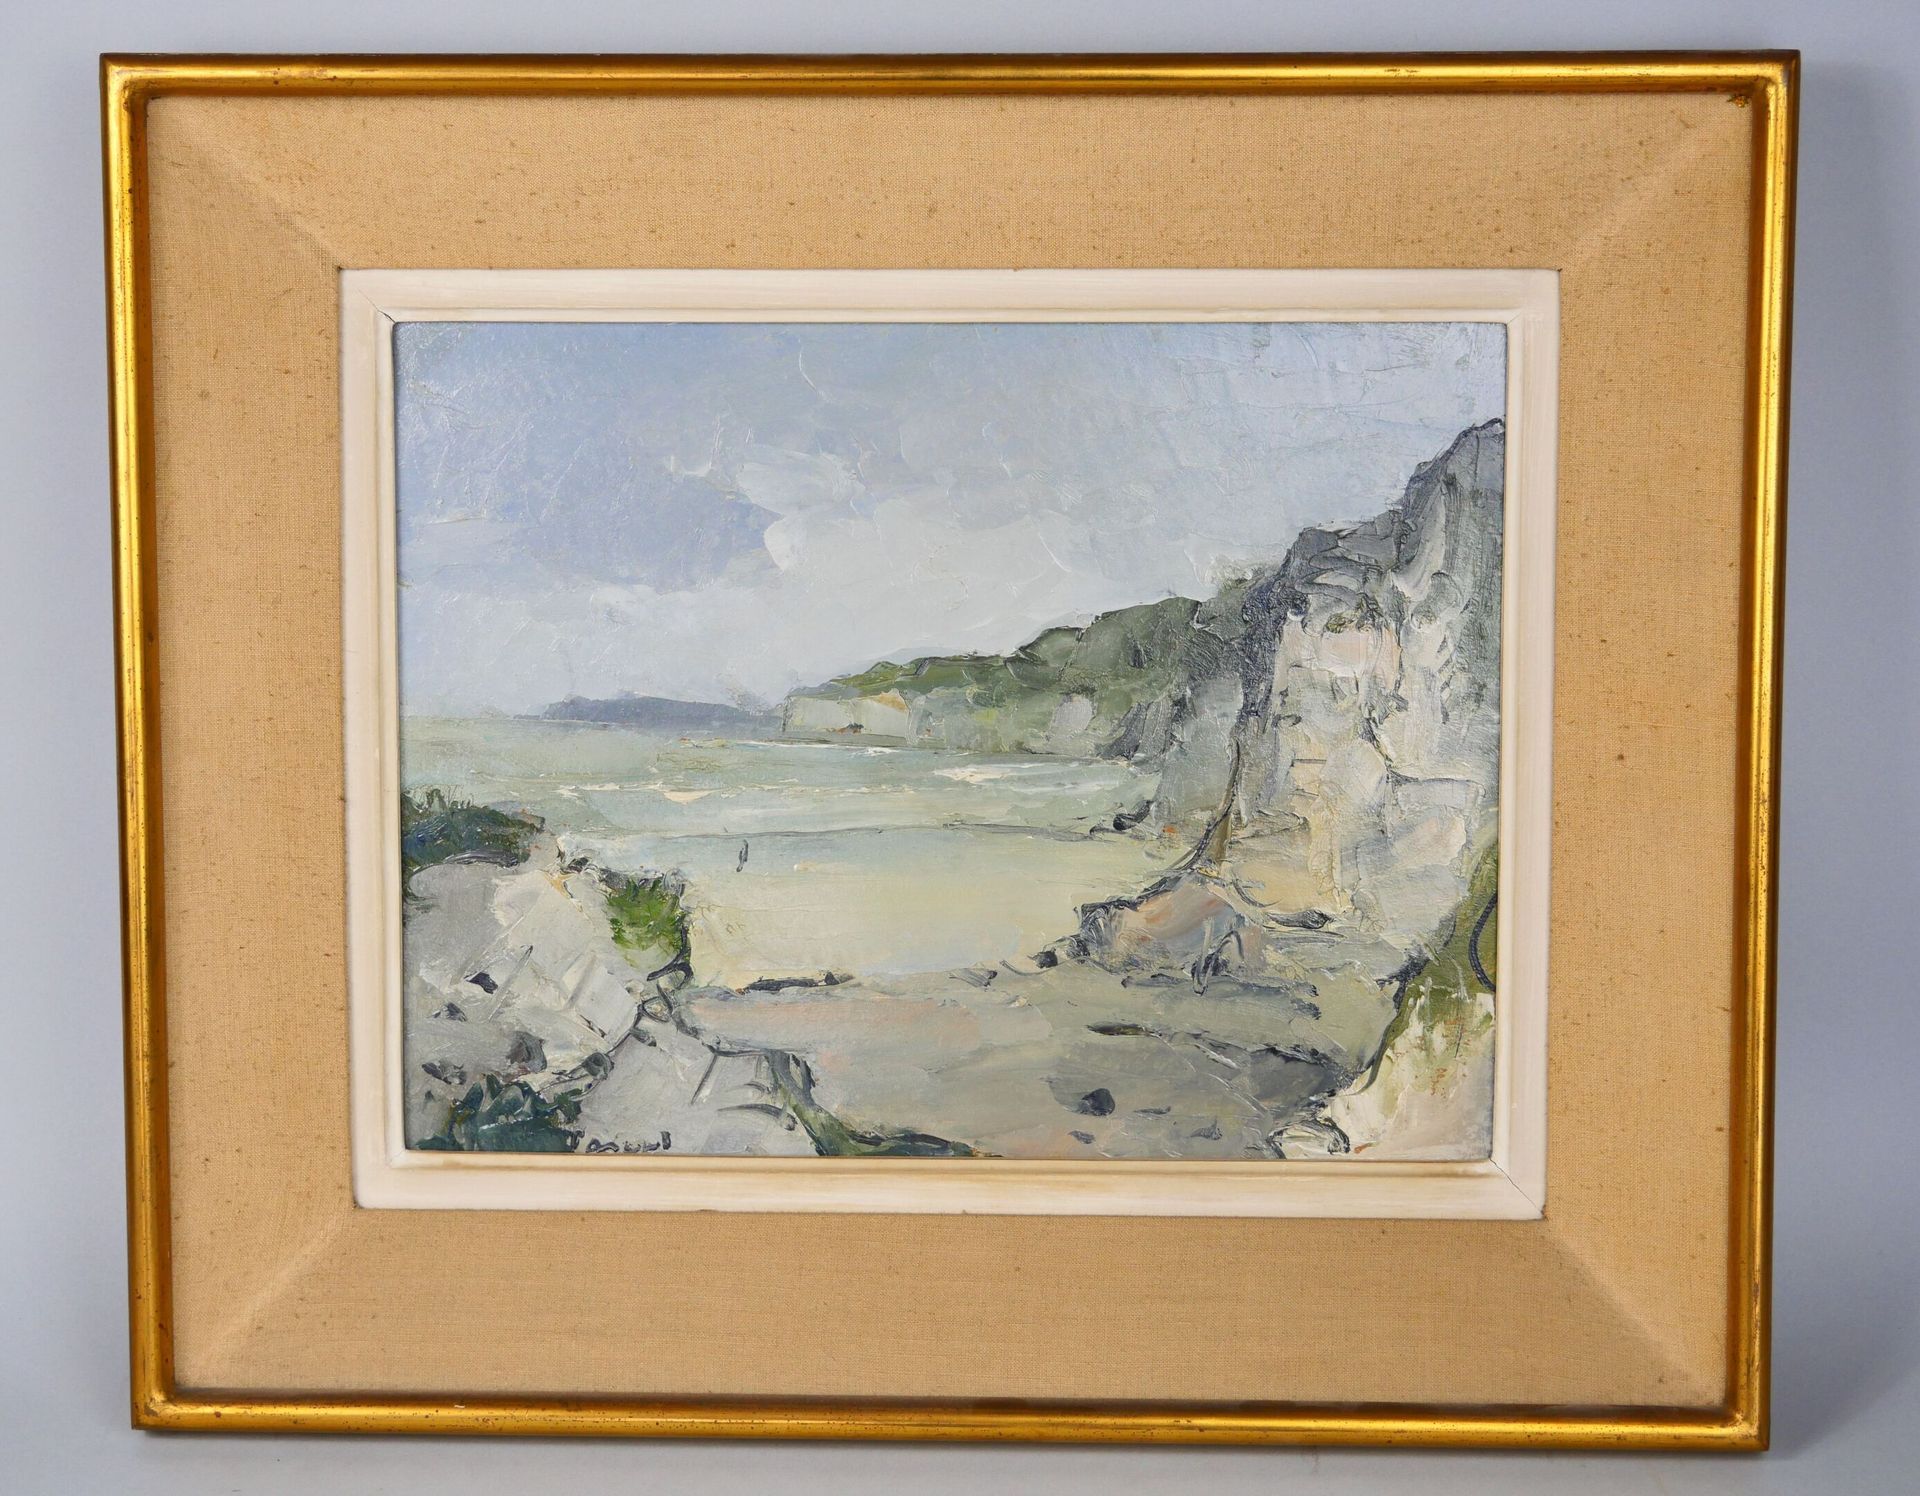 Null Léopold PASCAL (1900-1958)
The cliffs 
Oil on panel signed lower left
Dimen&hellip;